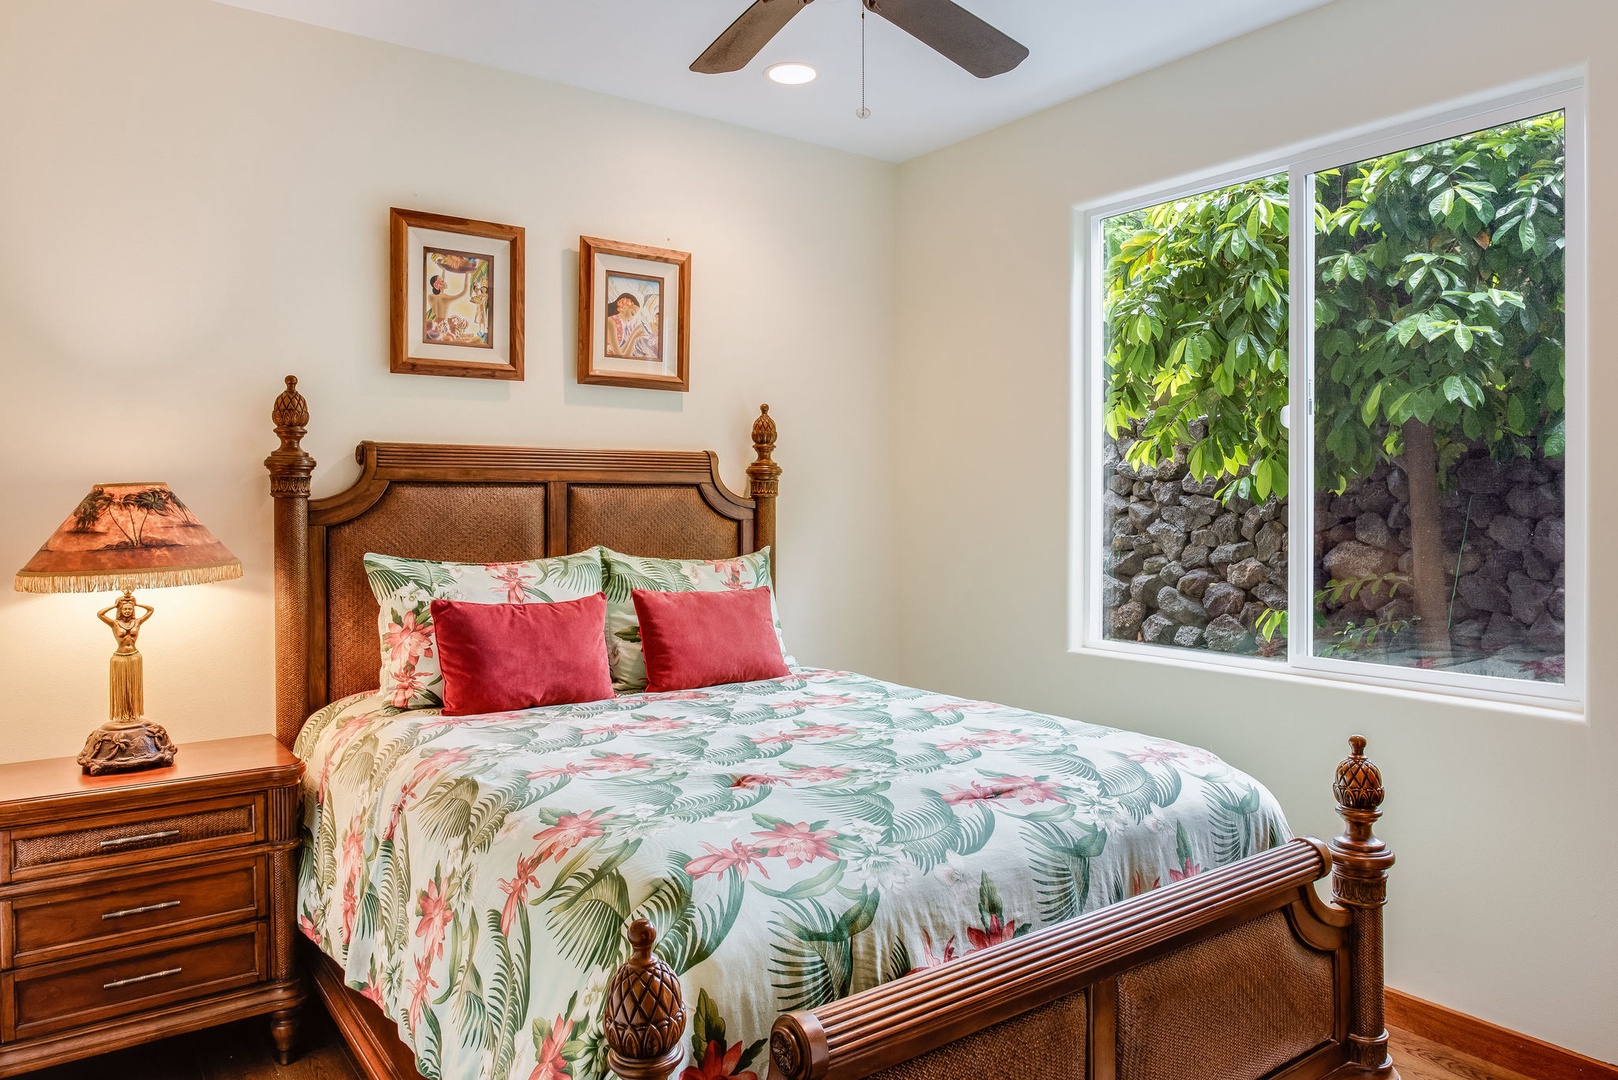 Kailua Kona Vacation Rentals, Kona Beach Bungalows** - Slumber in style in Honu's plush queen bed, an oasis of comfort and tranquility.